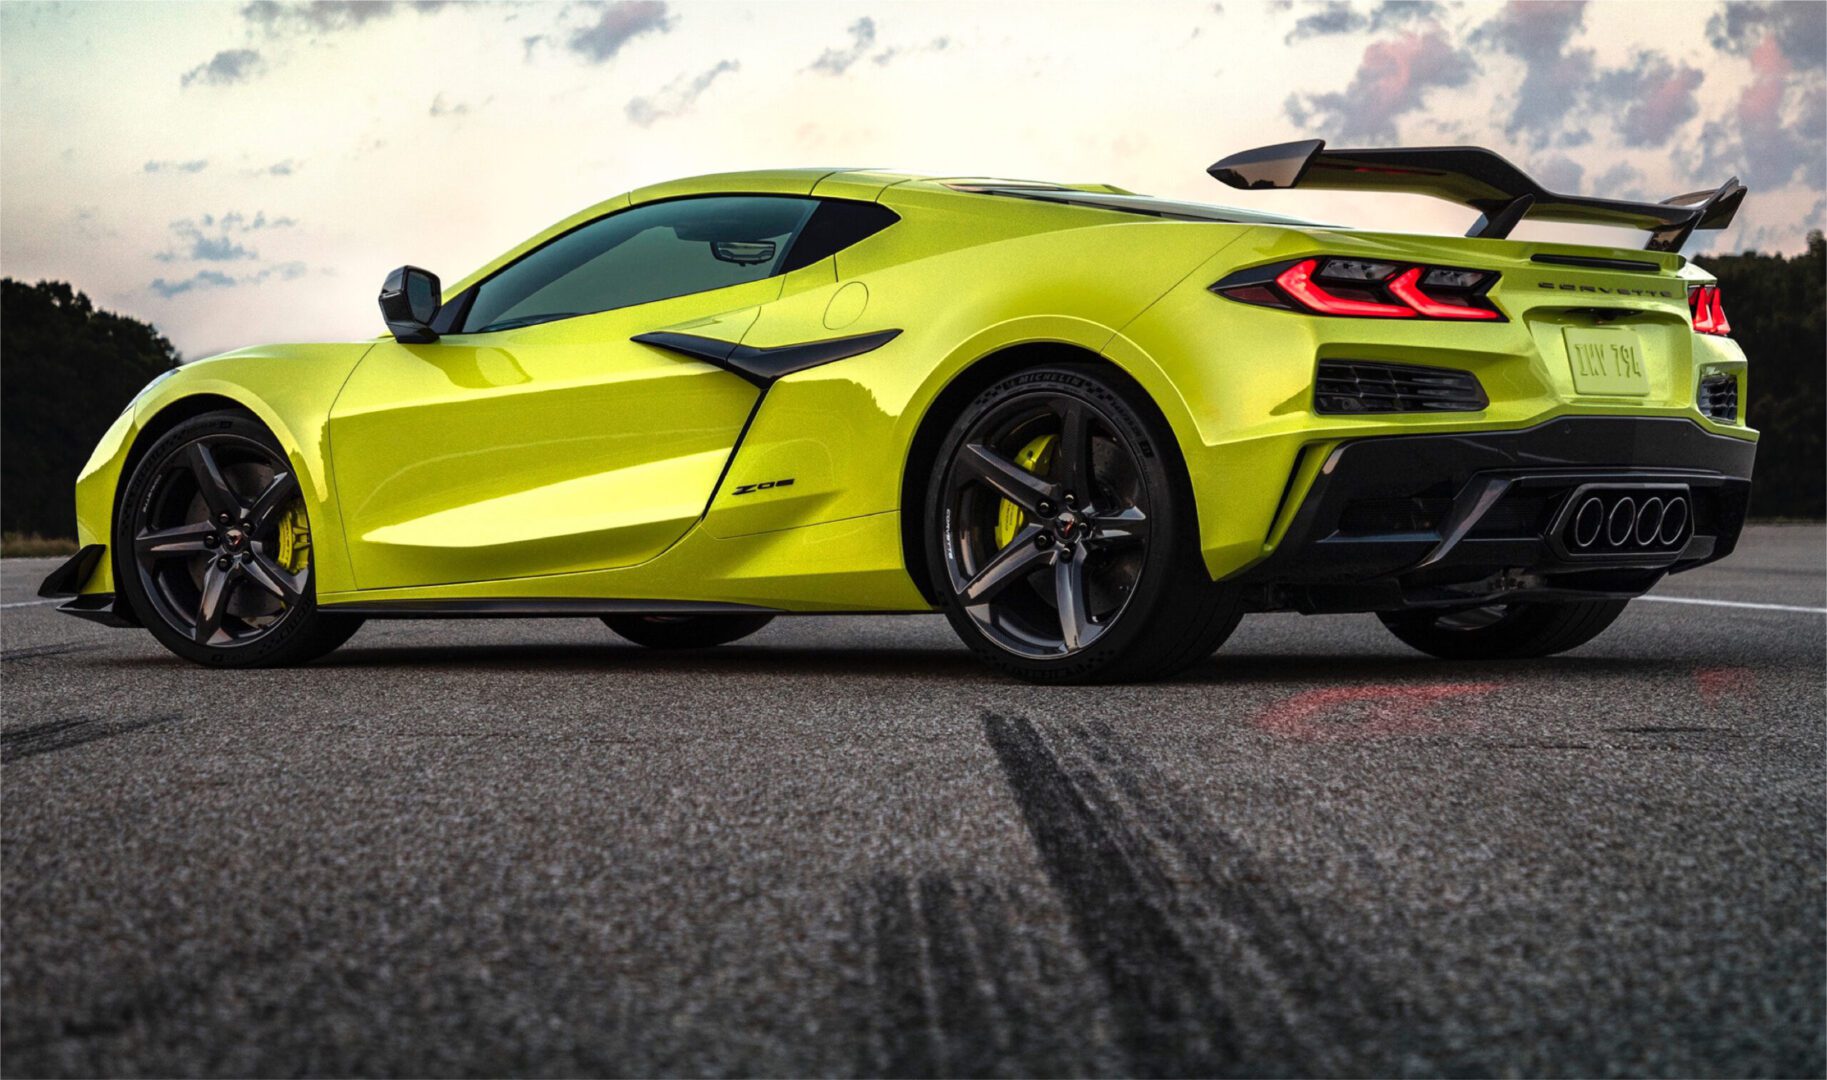 The 2020 chevrolet corvette gtr is parked on a road.